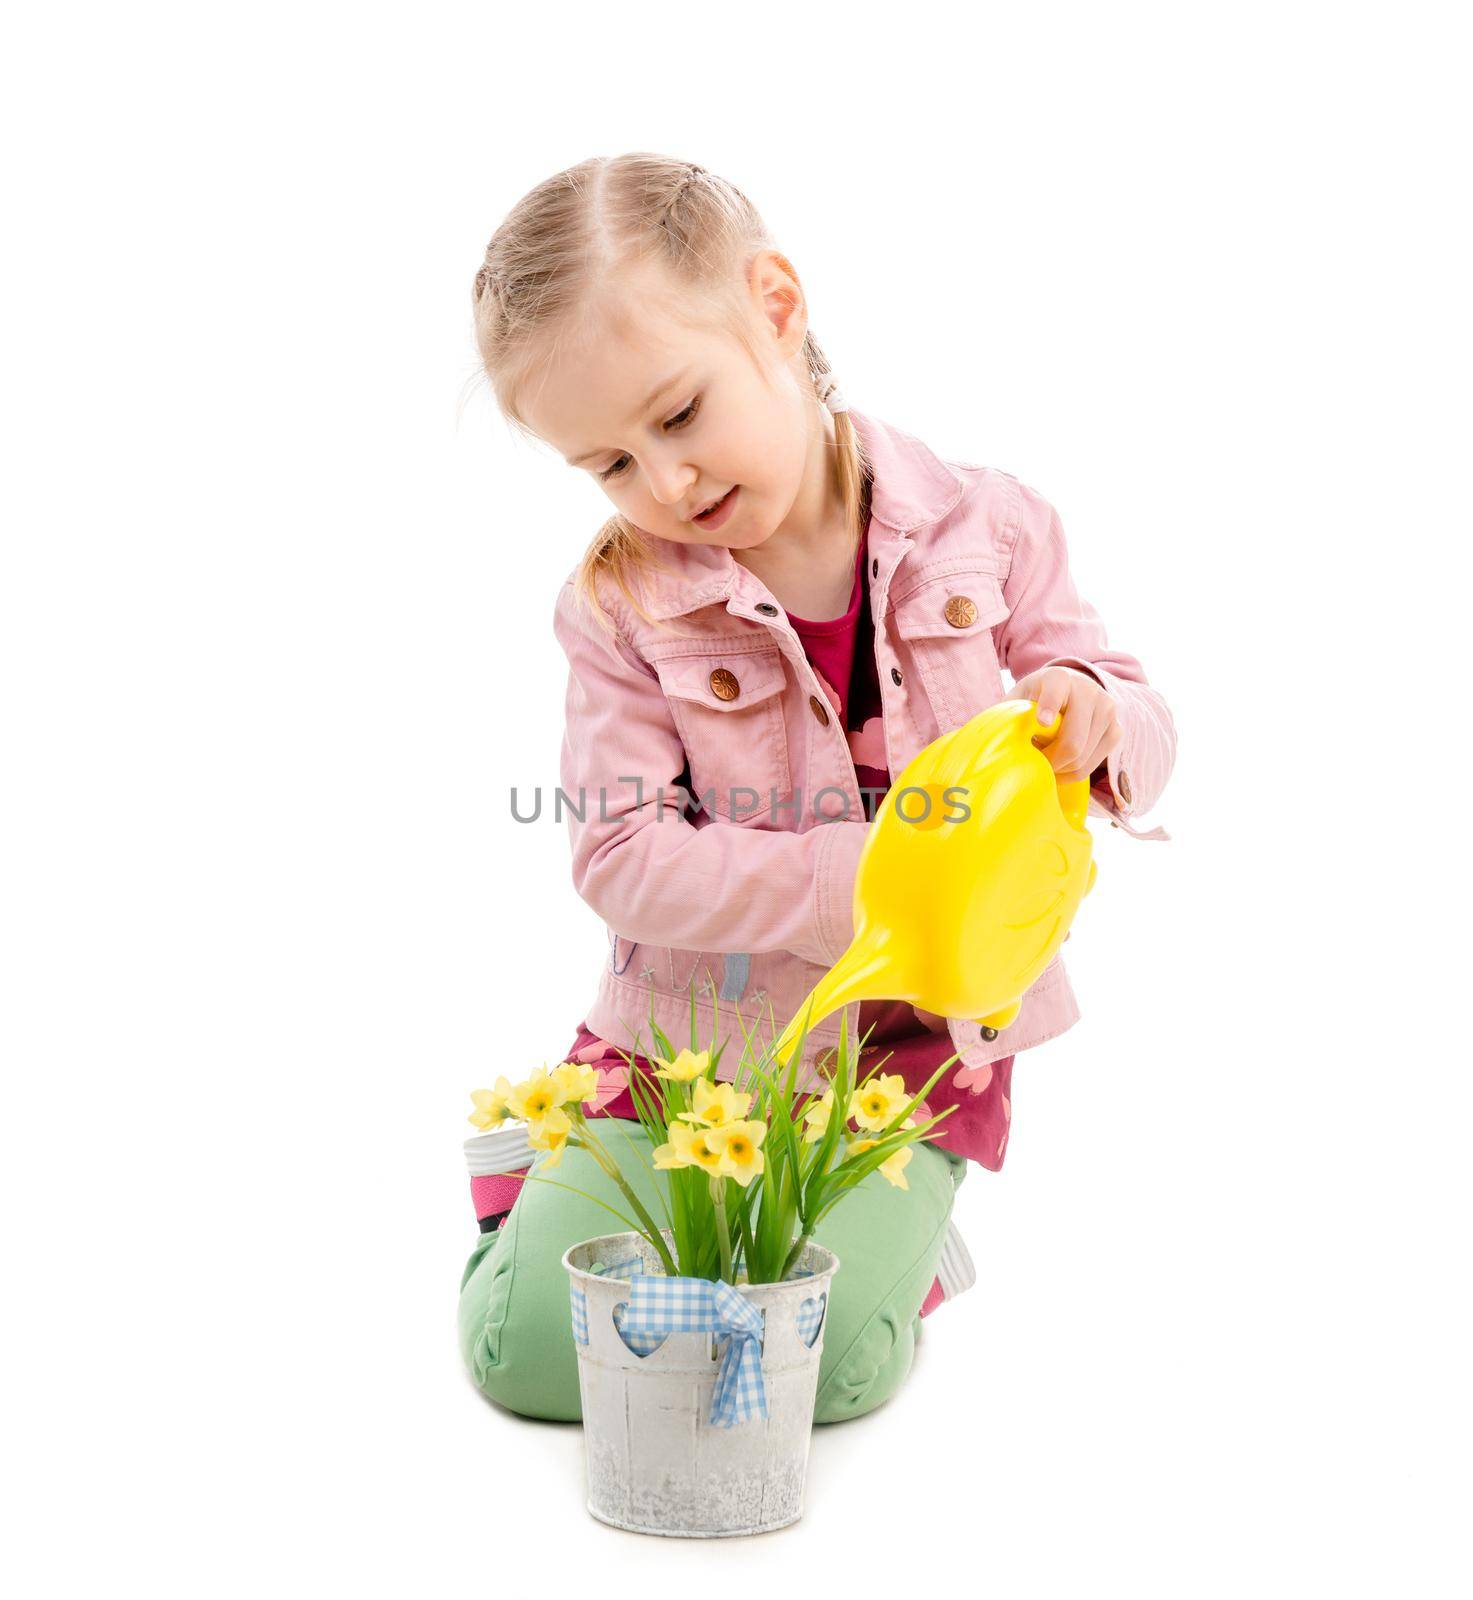 kid watering flowers, isolated on white background by tan4ikk1